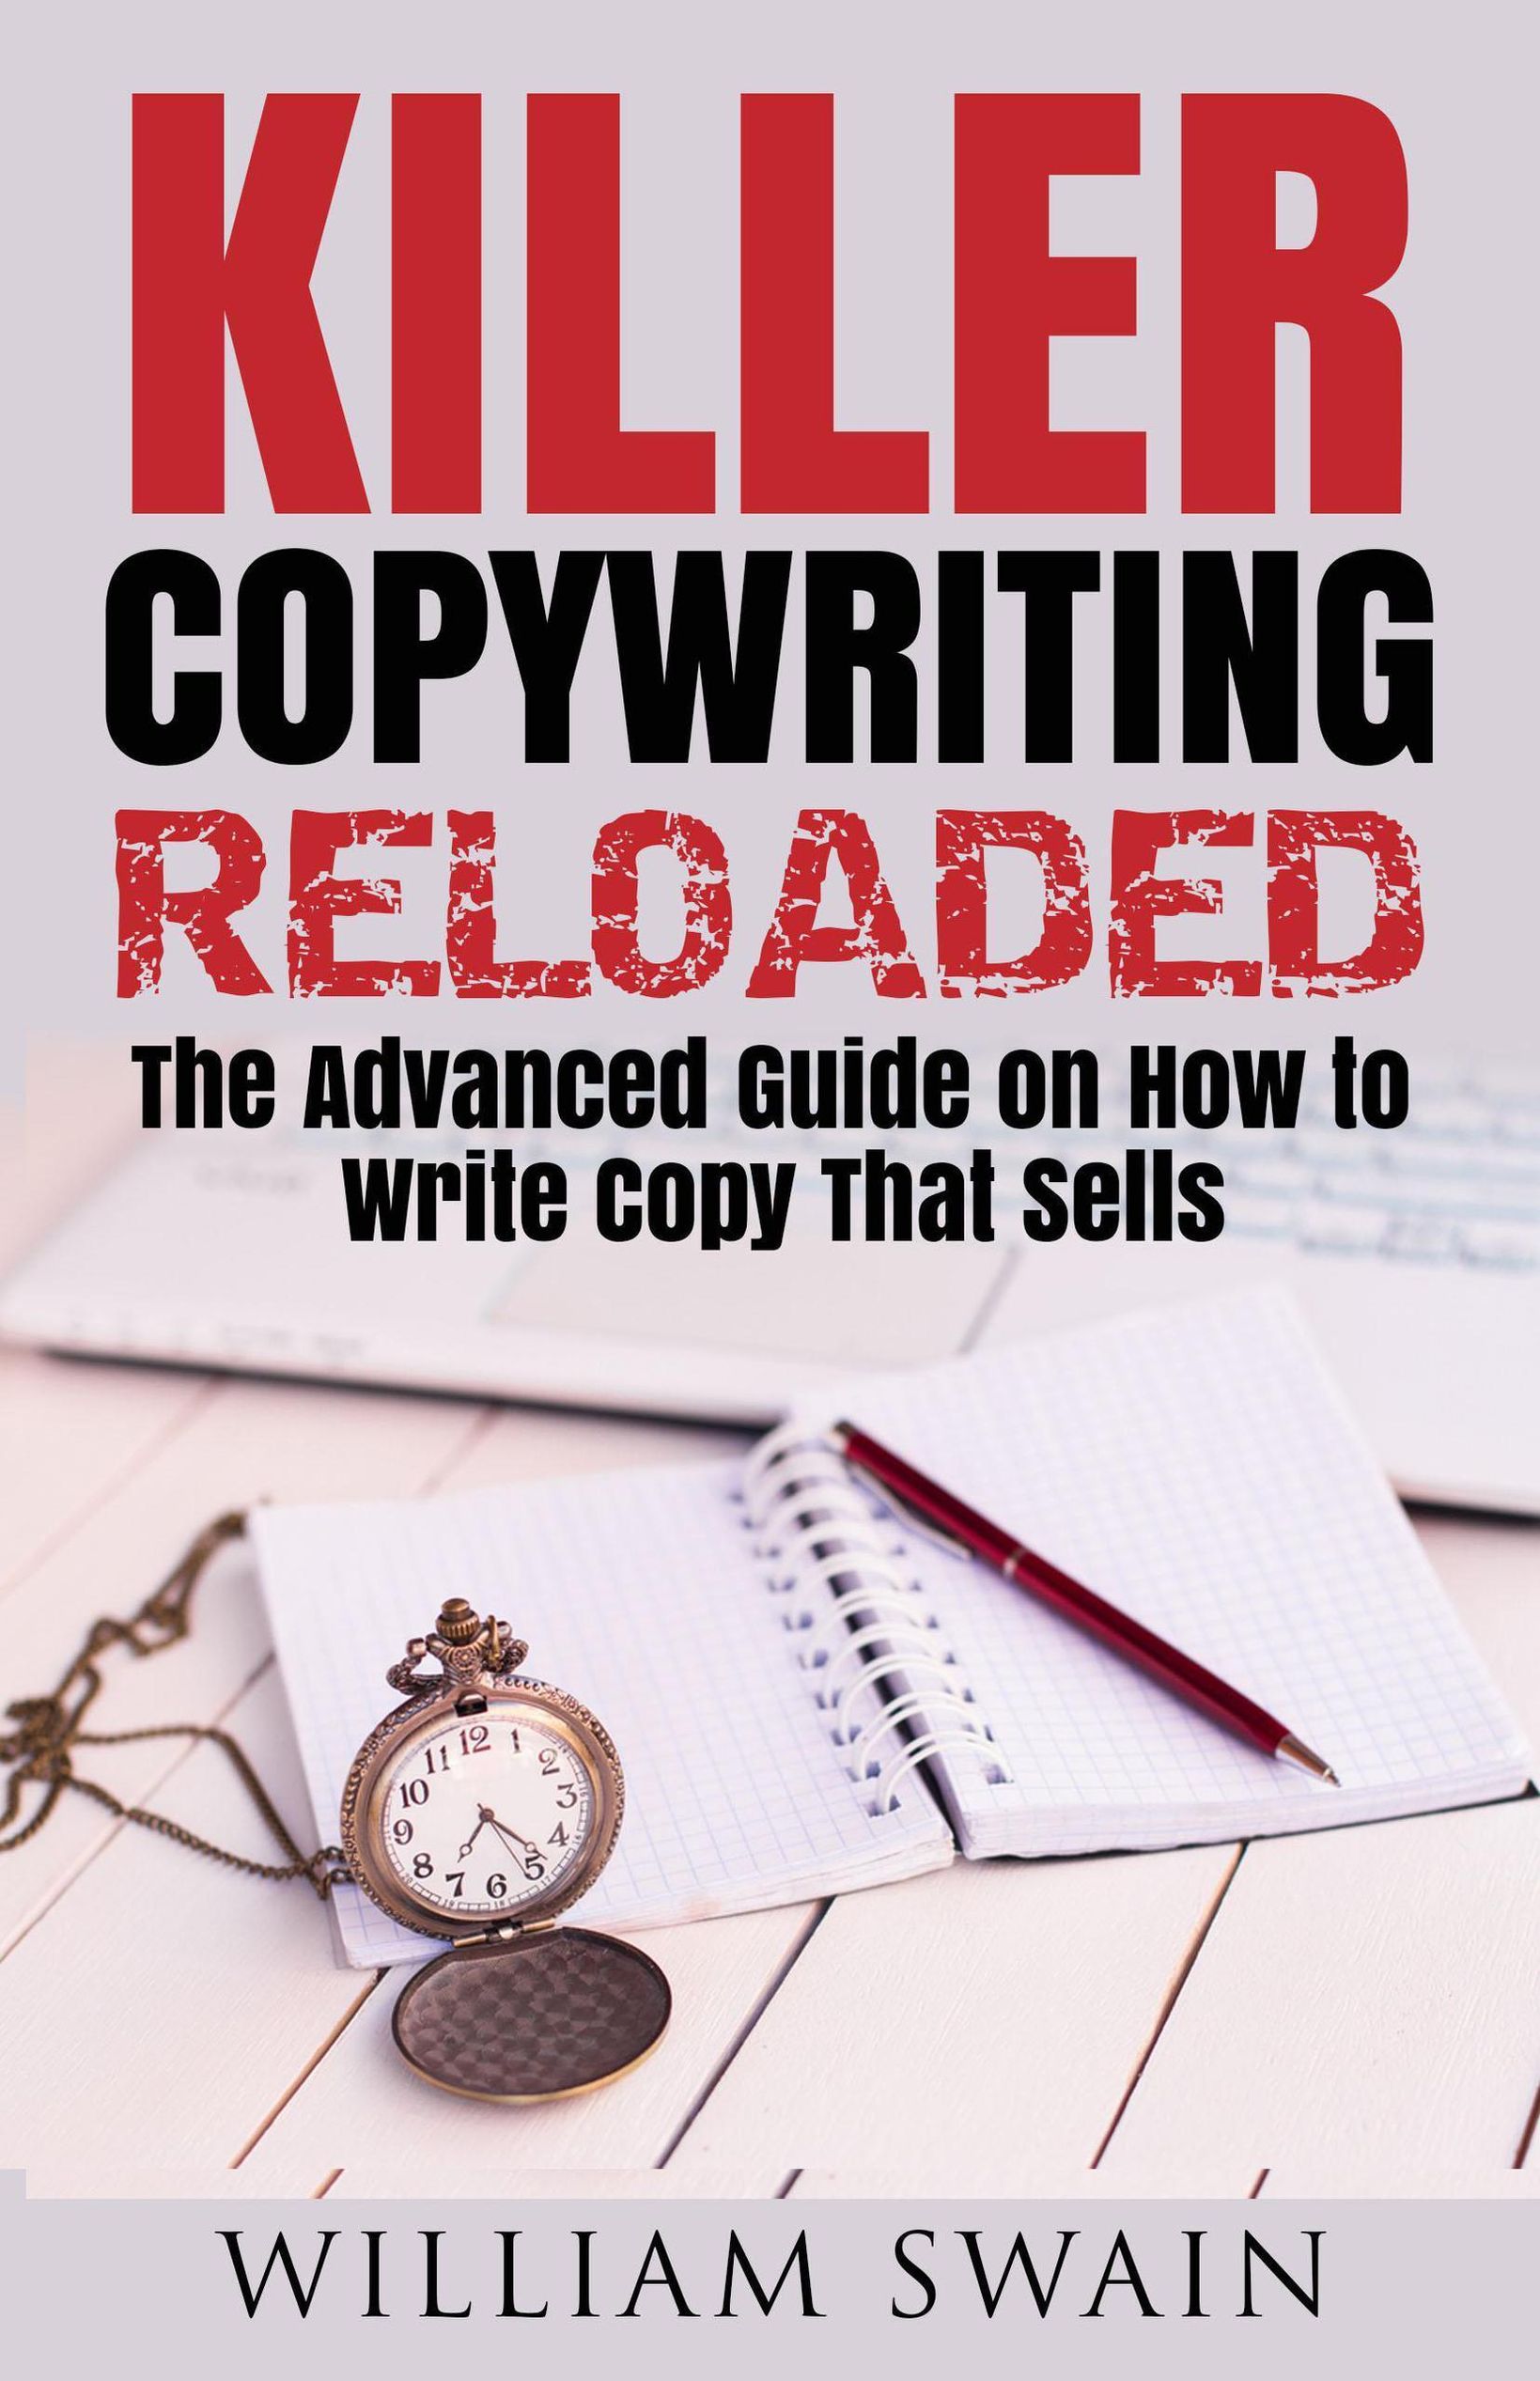 Killer Copywriting Reloaded, The Advanced Guide On How To Write